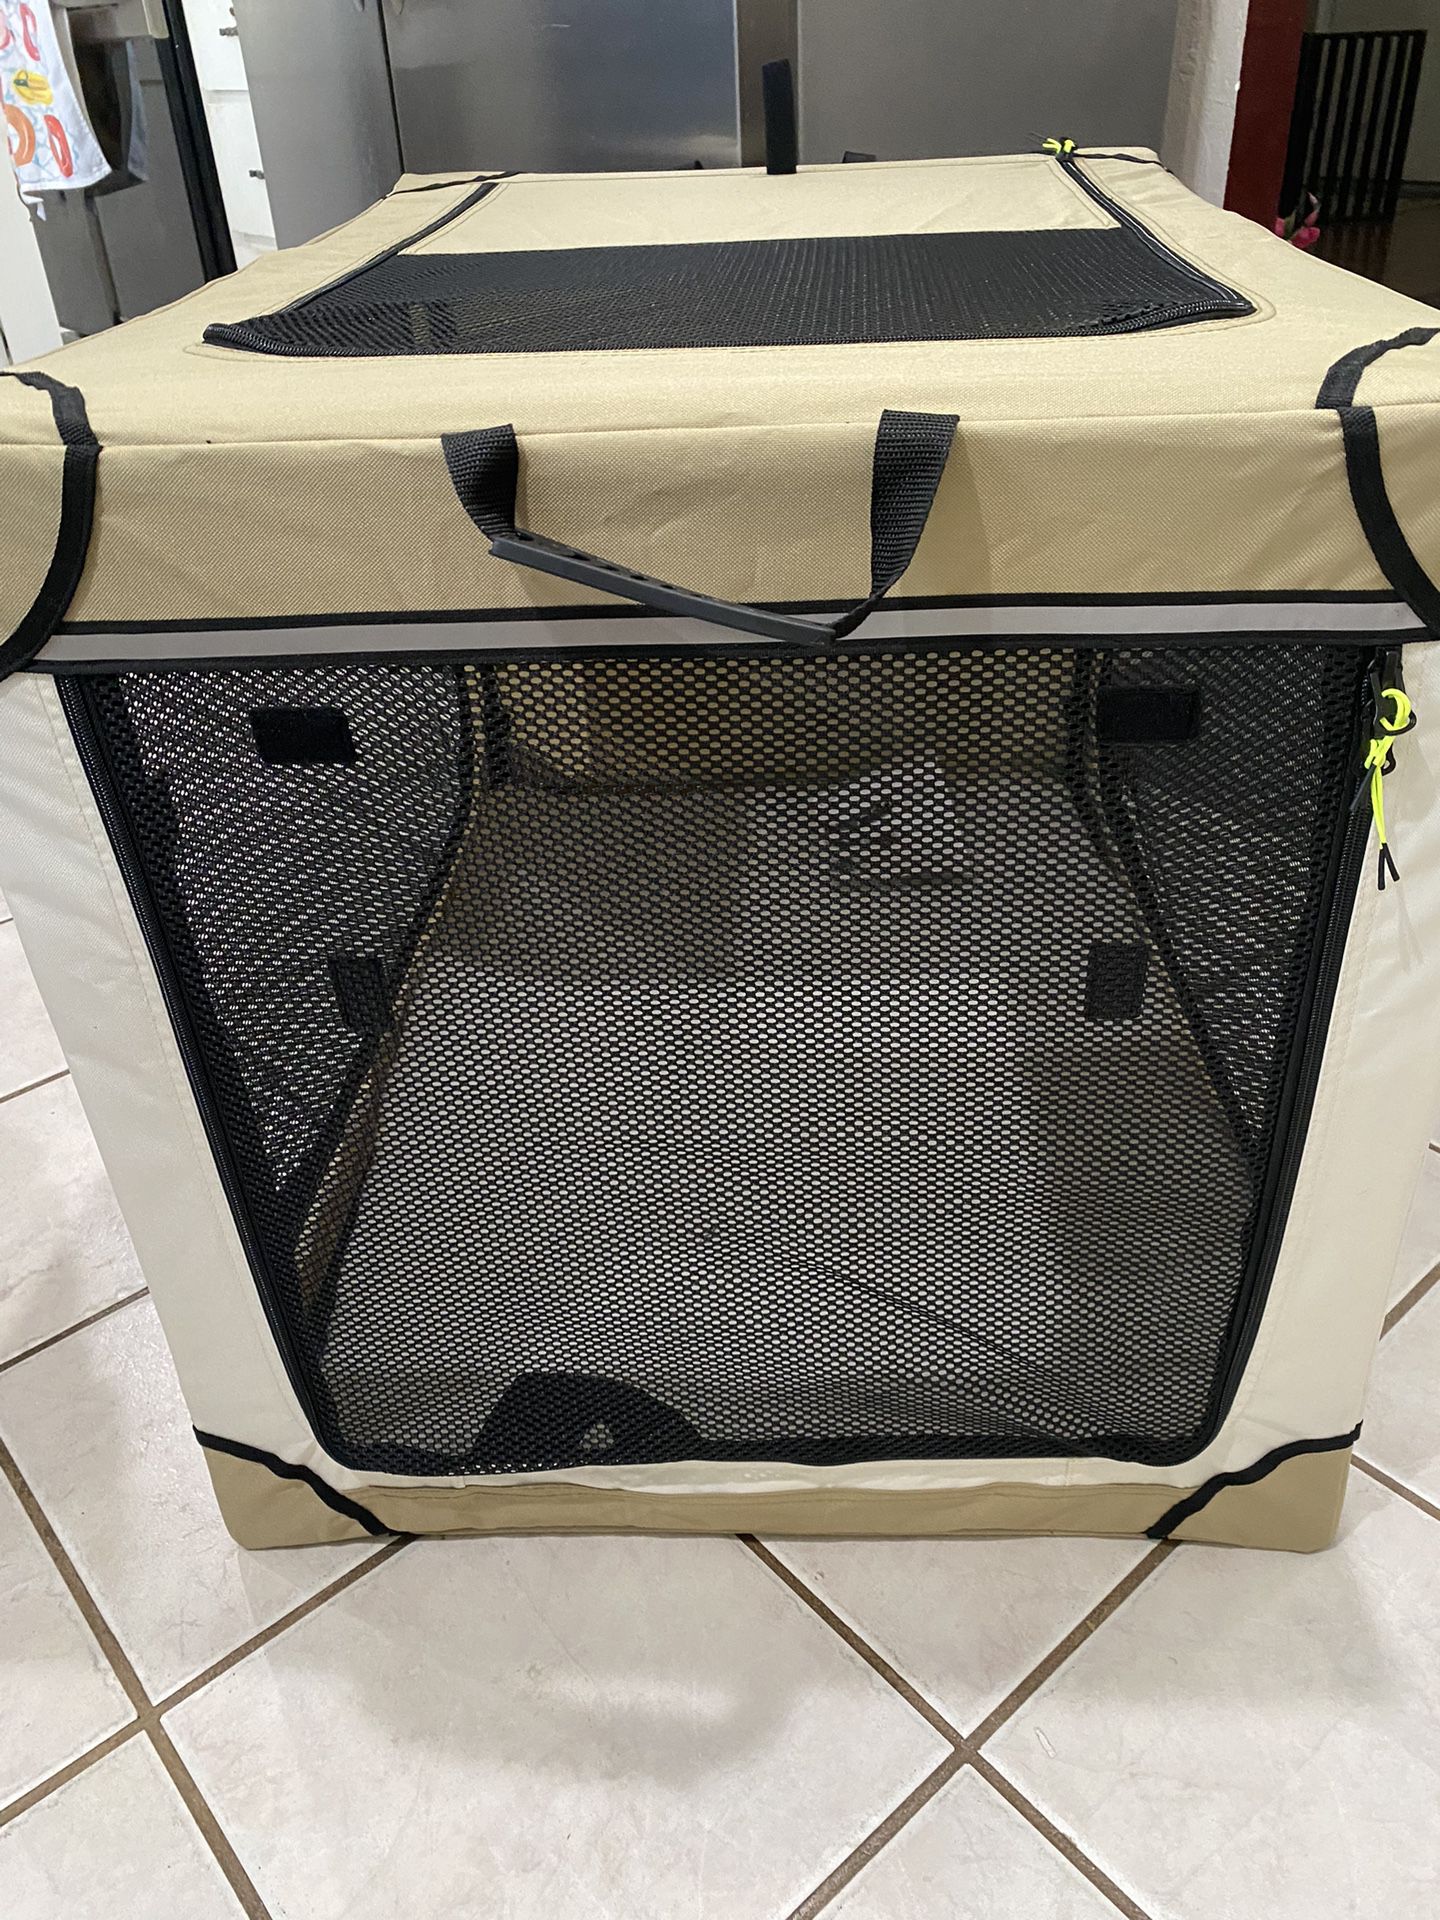 36” Dog Kennel With Soft May. Fold Backpack Style NEW